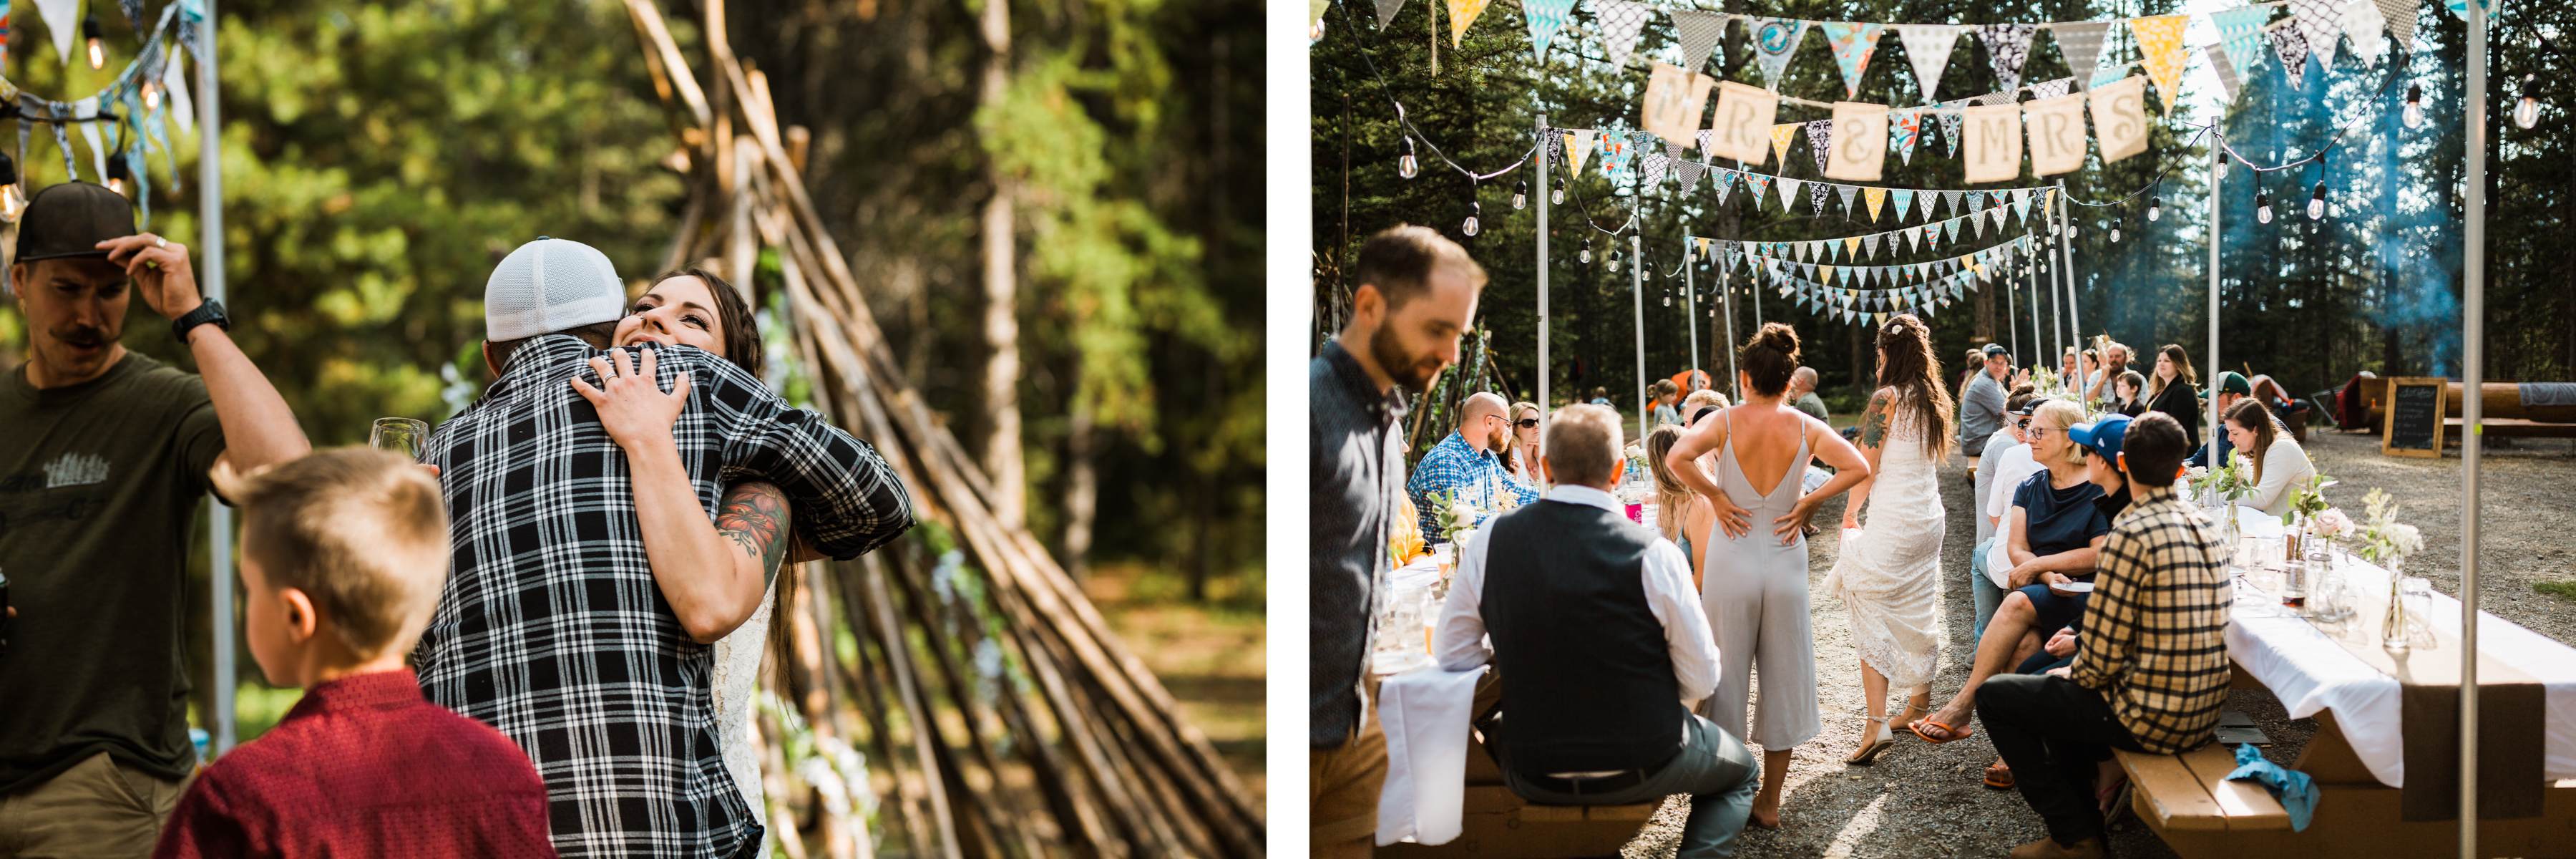 Canmore Camping Wedding Photography - Image 49